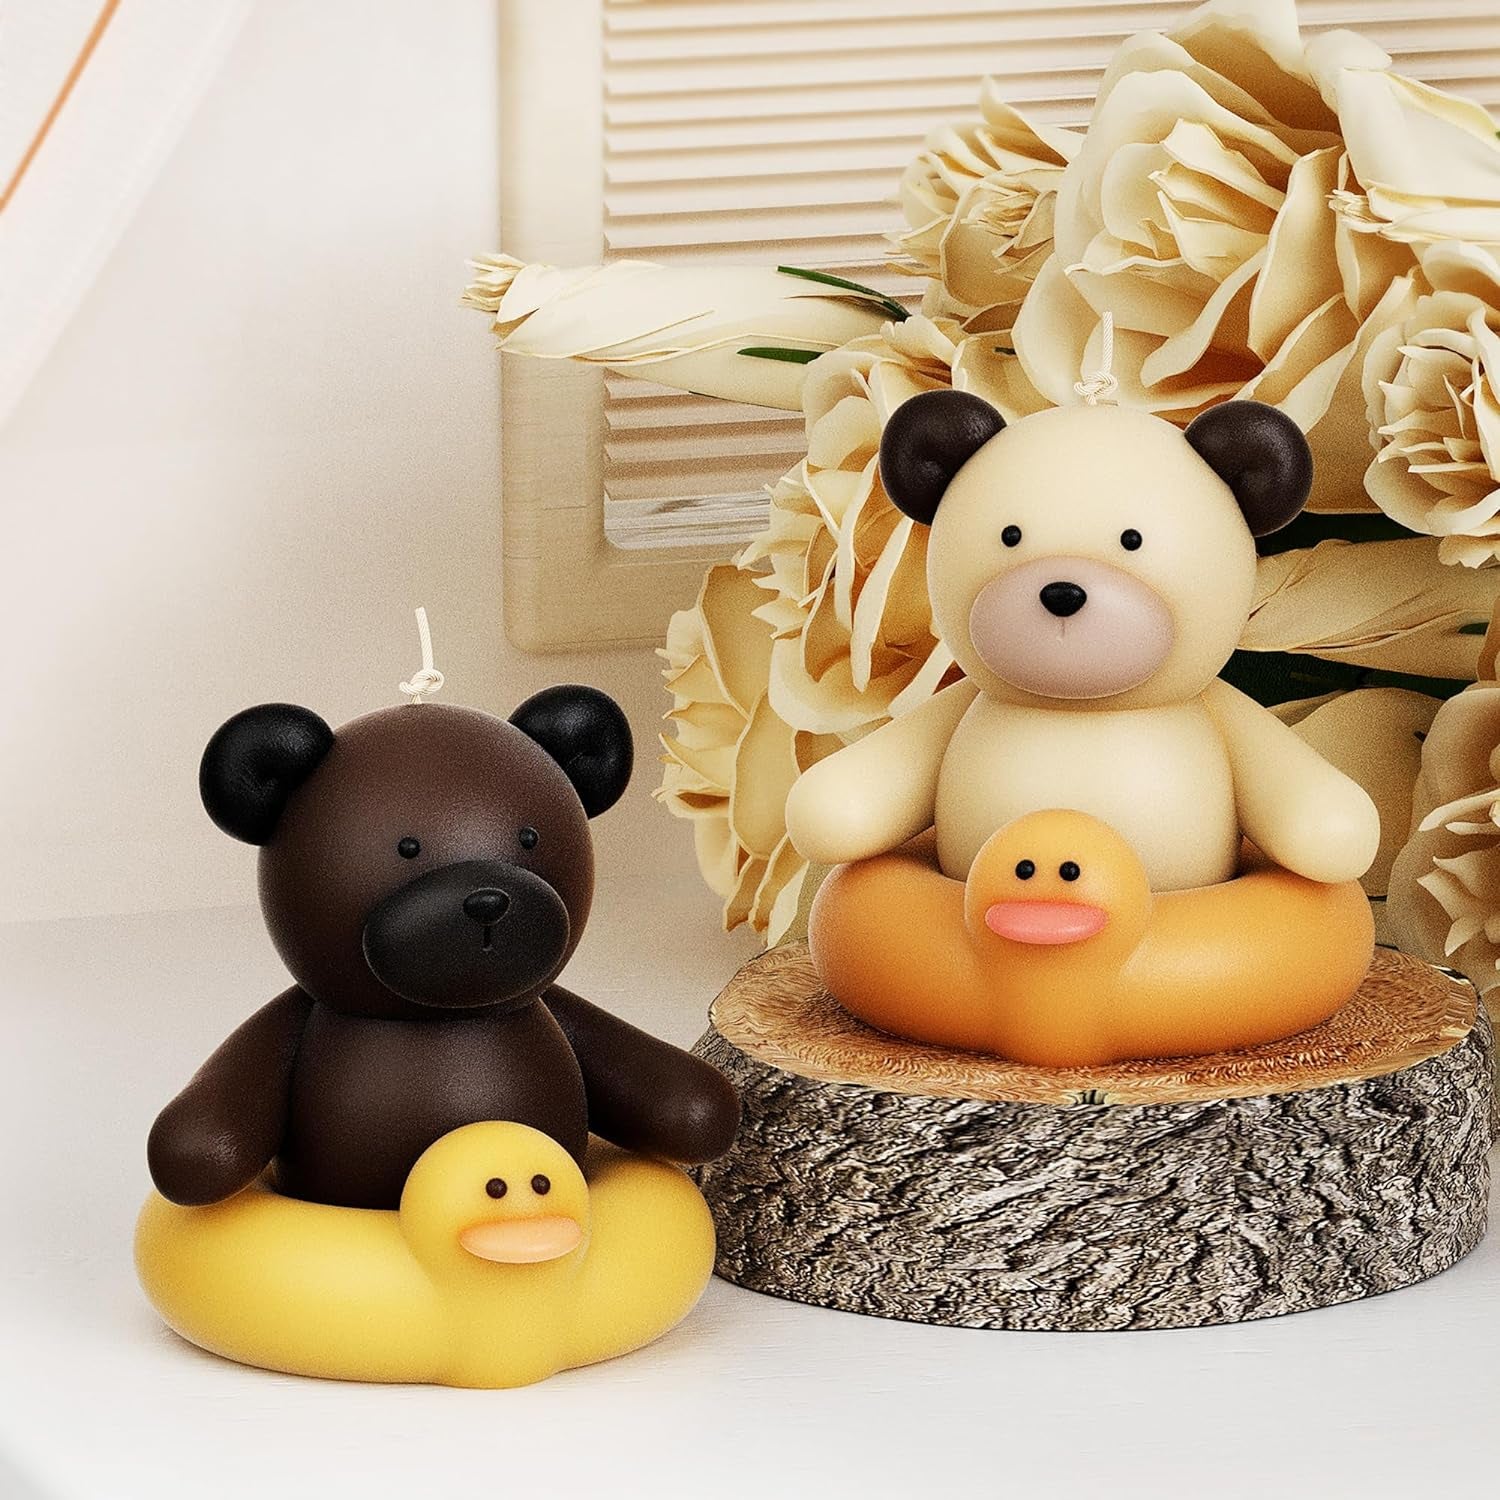 Swimming Bear Mold Bear Candle Mold Swim Bear Mold Bear Animal Mold Resin Casting Mold Resin Making Molds Silicone Mold for Candle Home Decorate Mold Candle Making Mold 3D Animal Mold